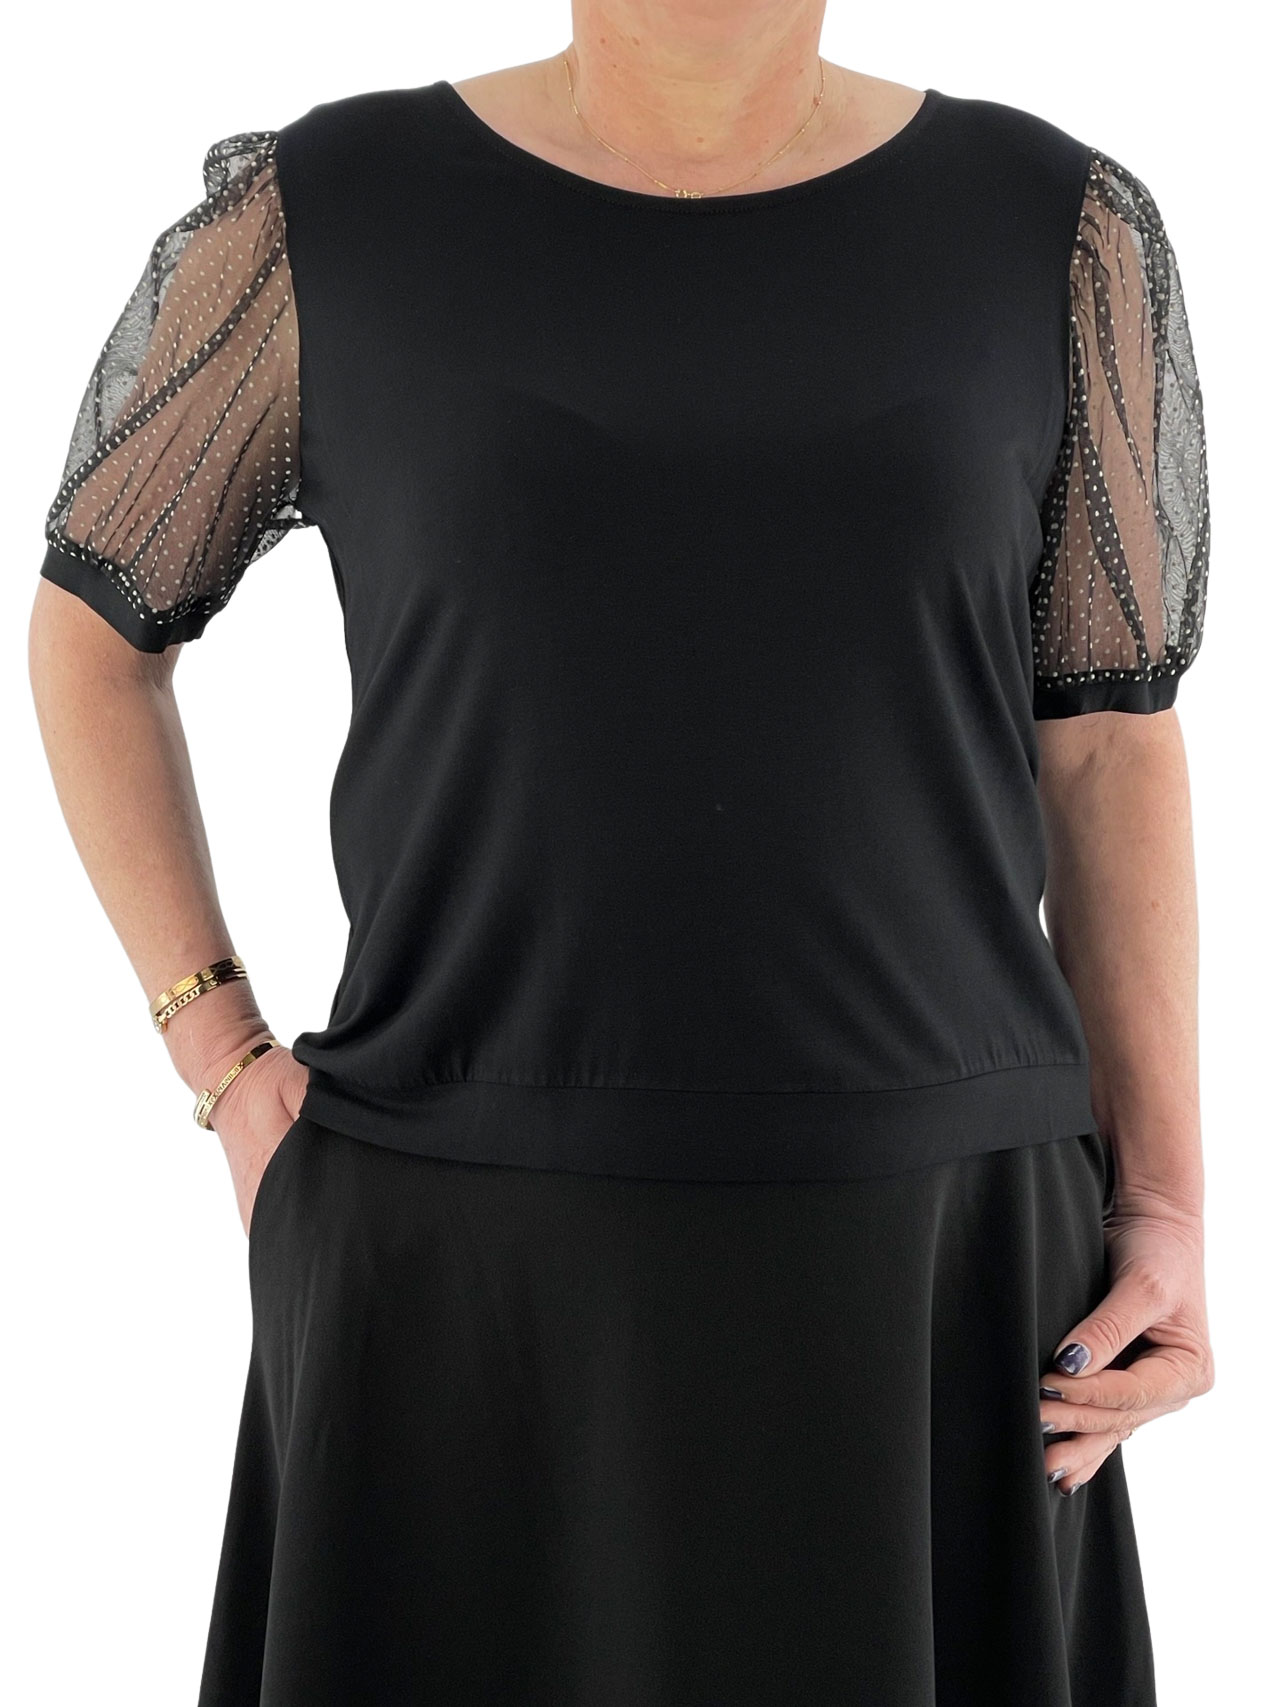 Women's blouse with polka dot tulle sleeves code 33501